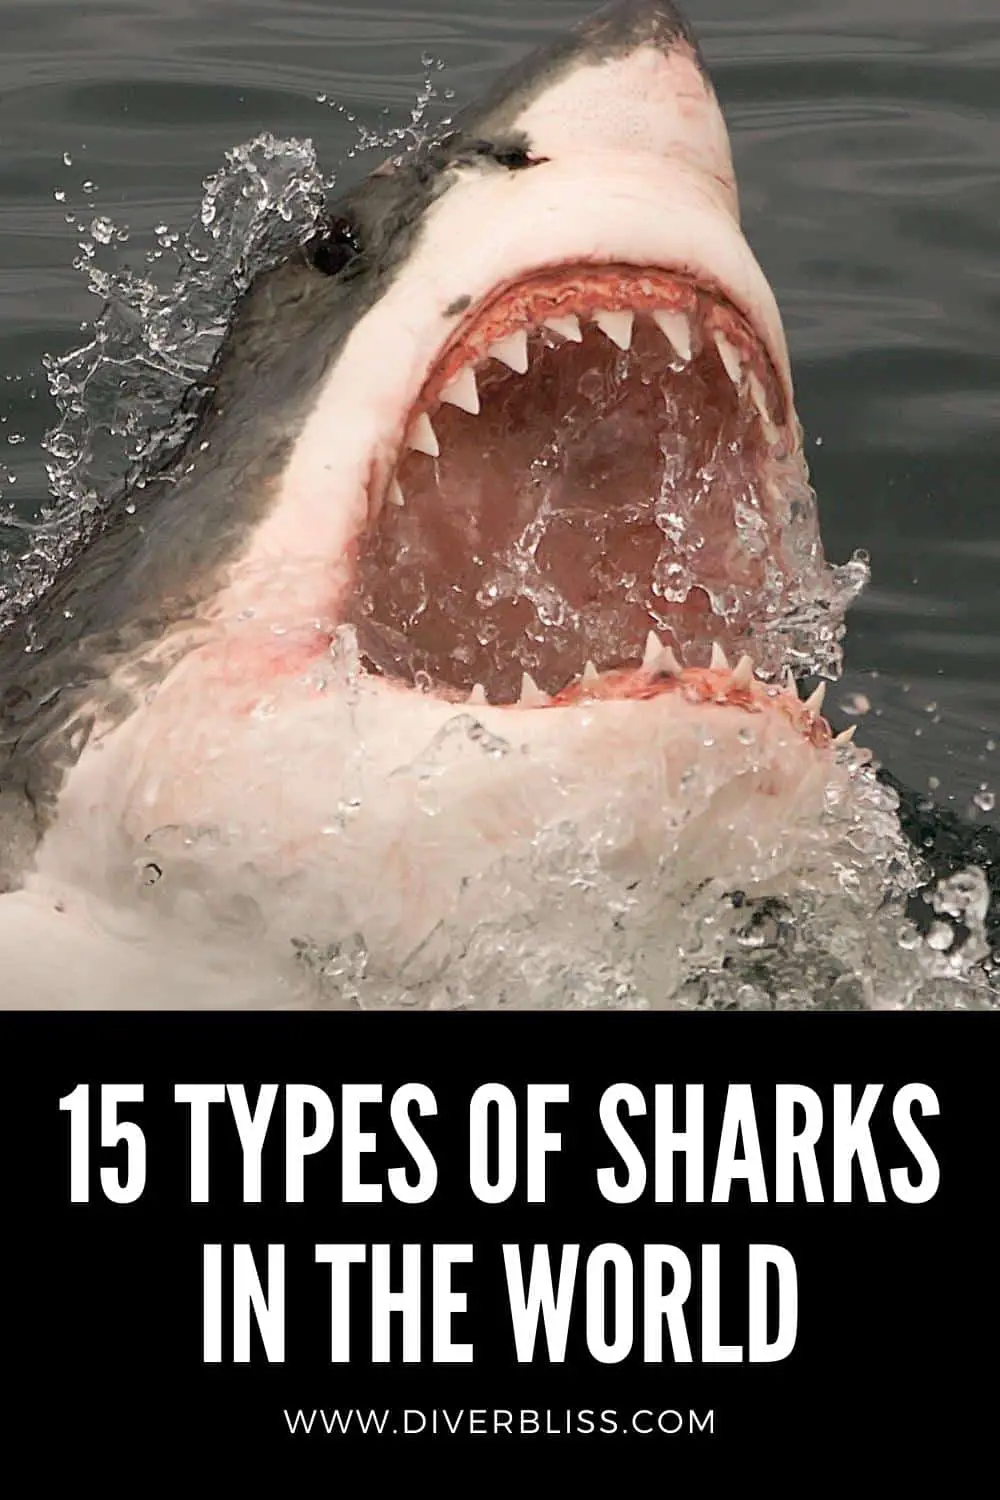 15 types of sharks in the world